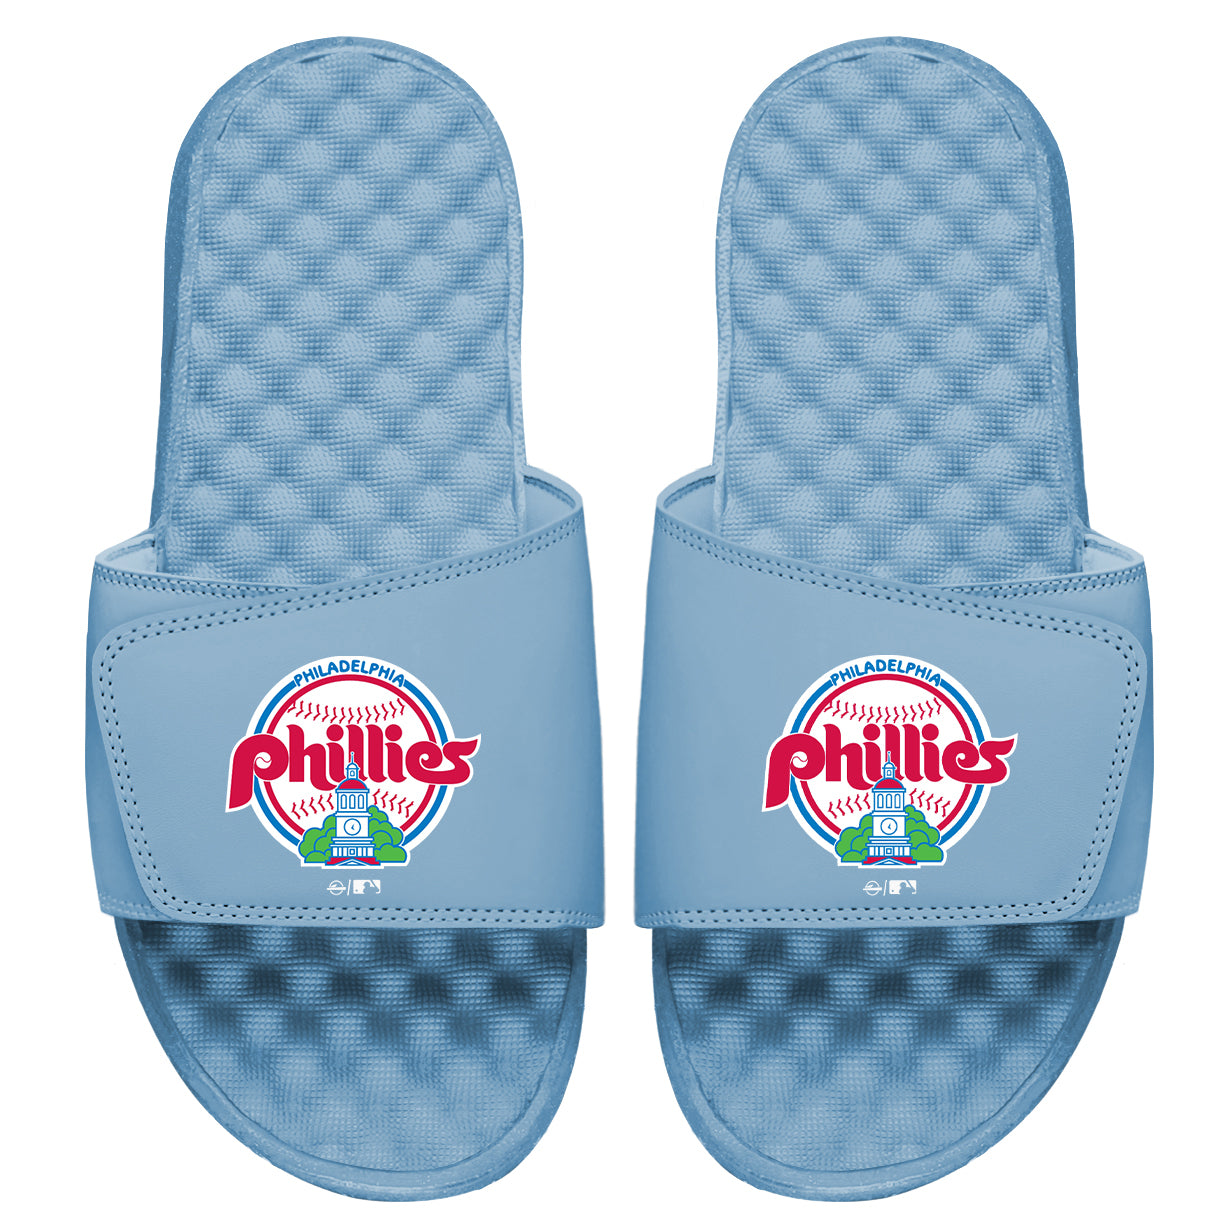 Phillies Cooperstown Patch Slides